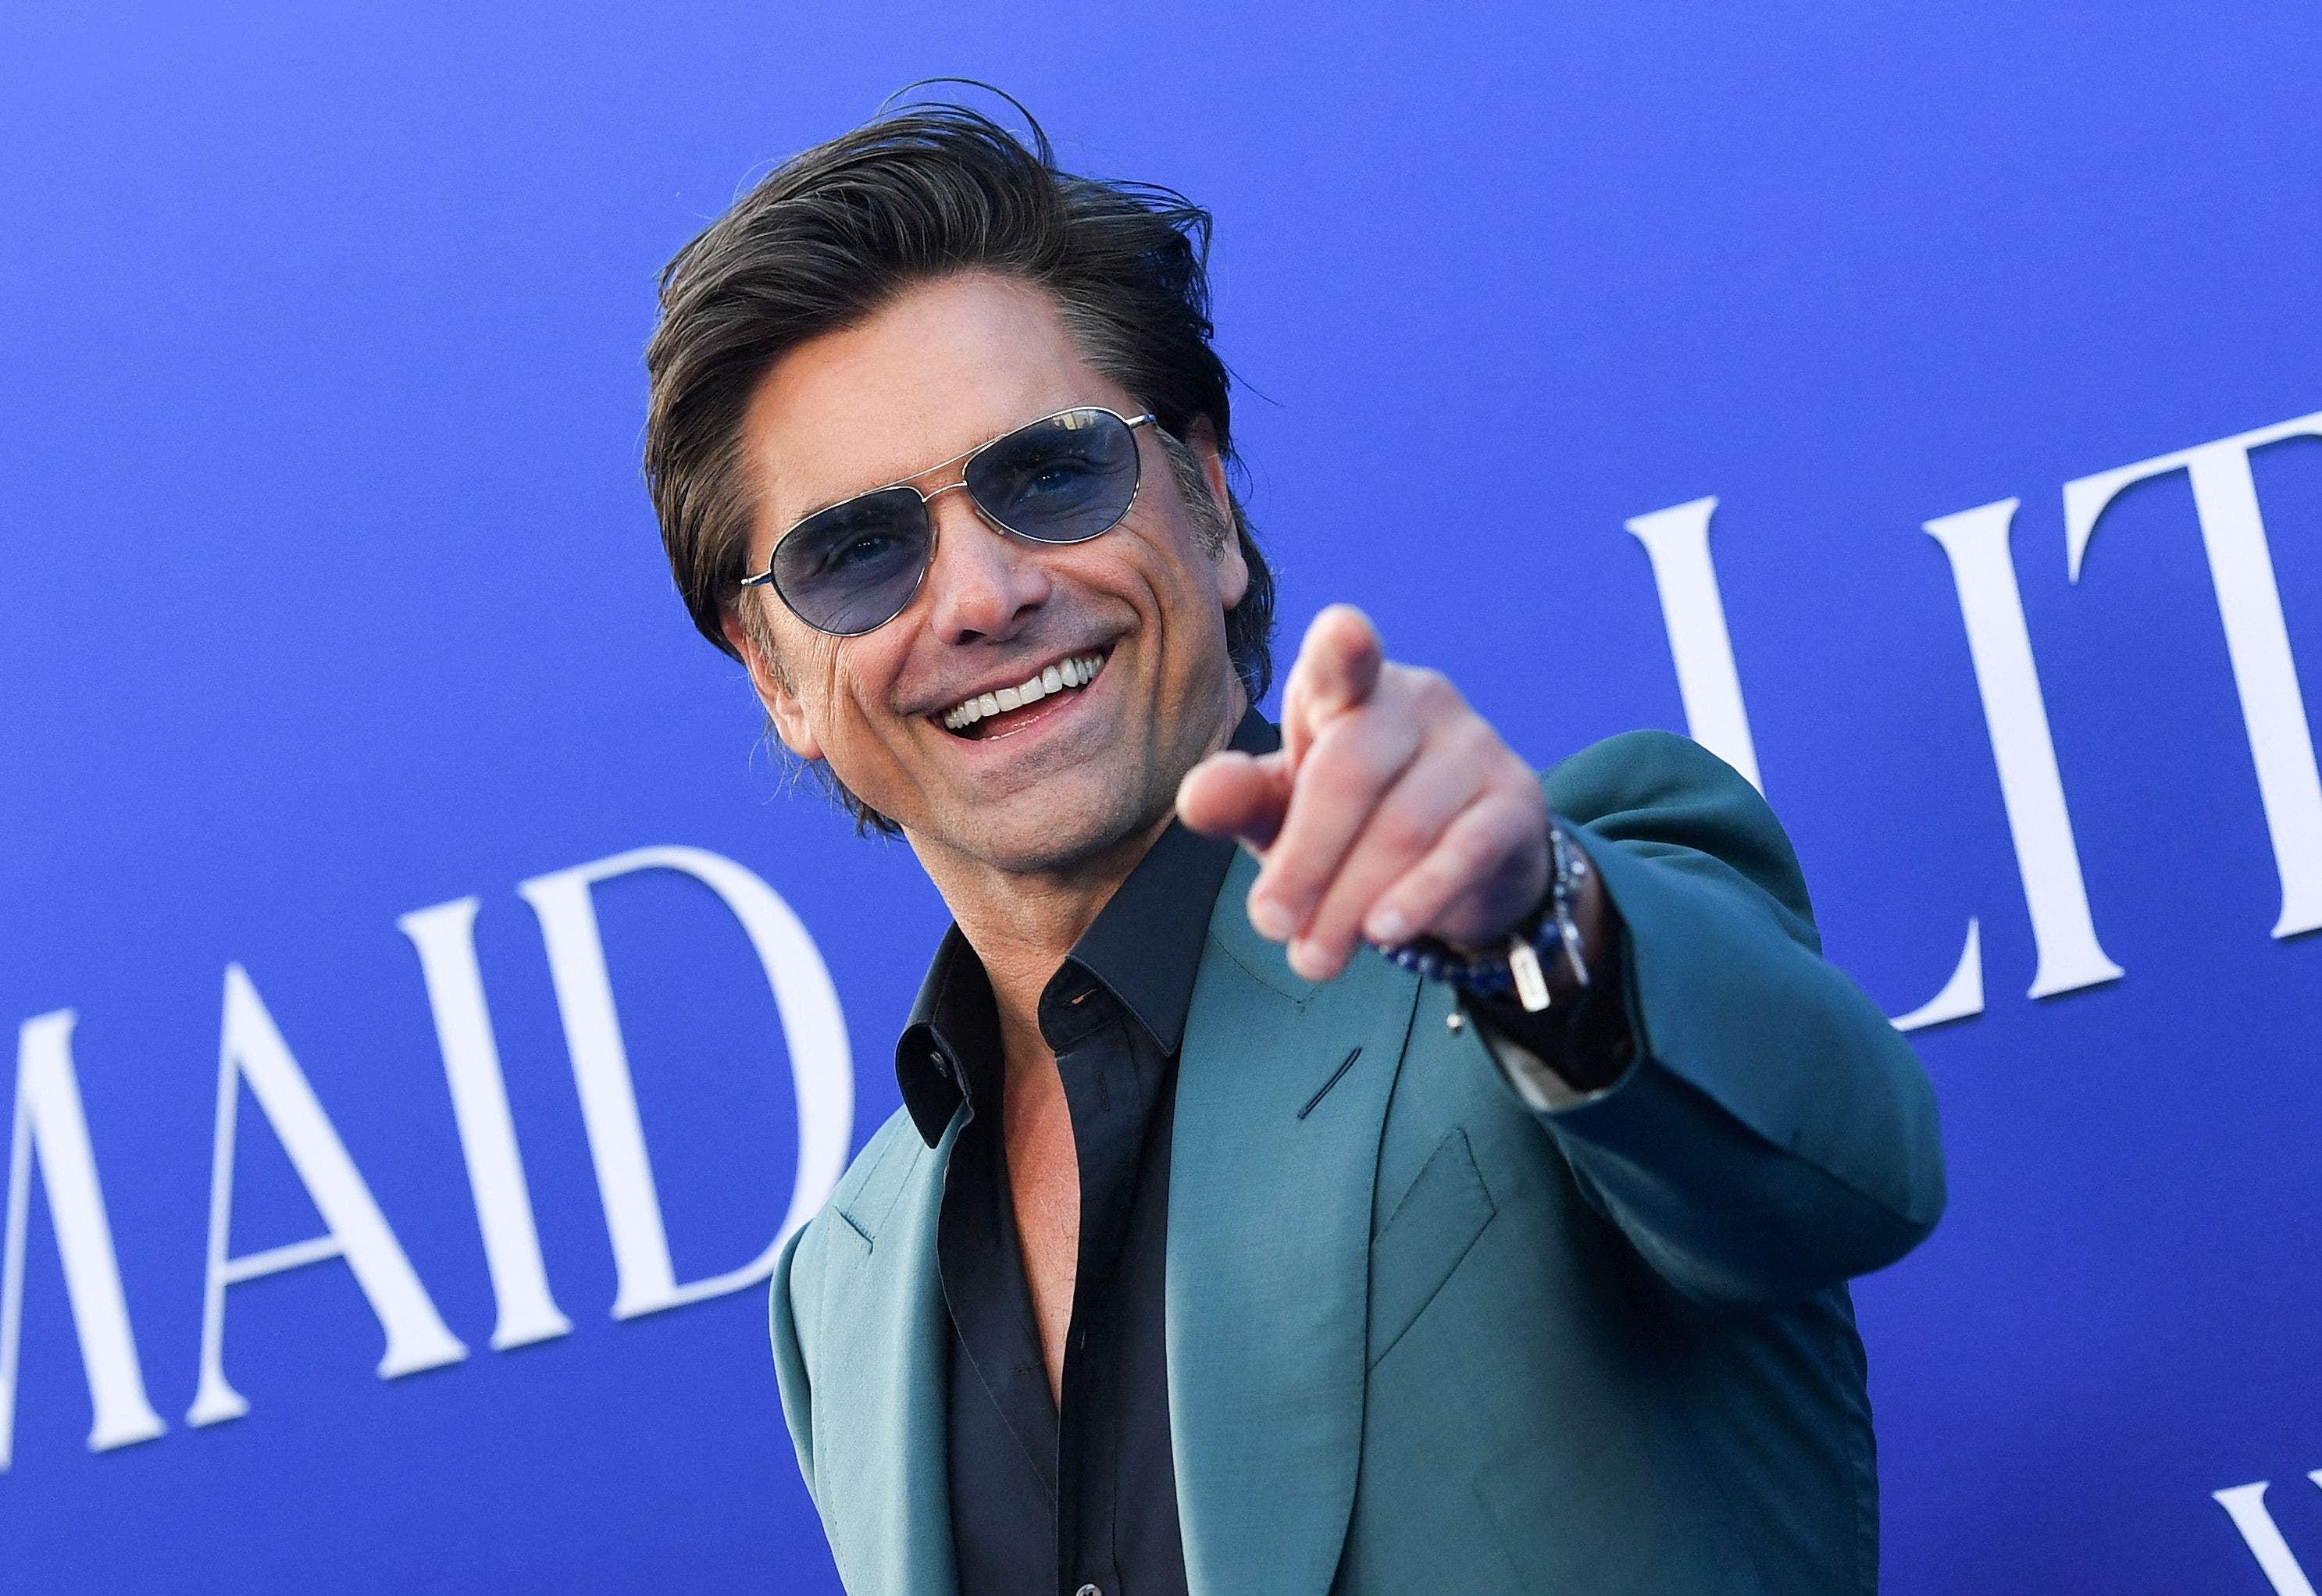 John Stamos smiling and wearing sunglasses and pointing